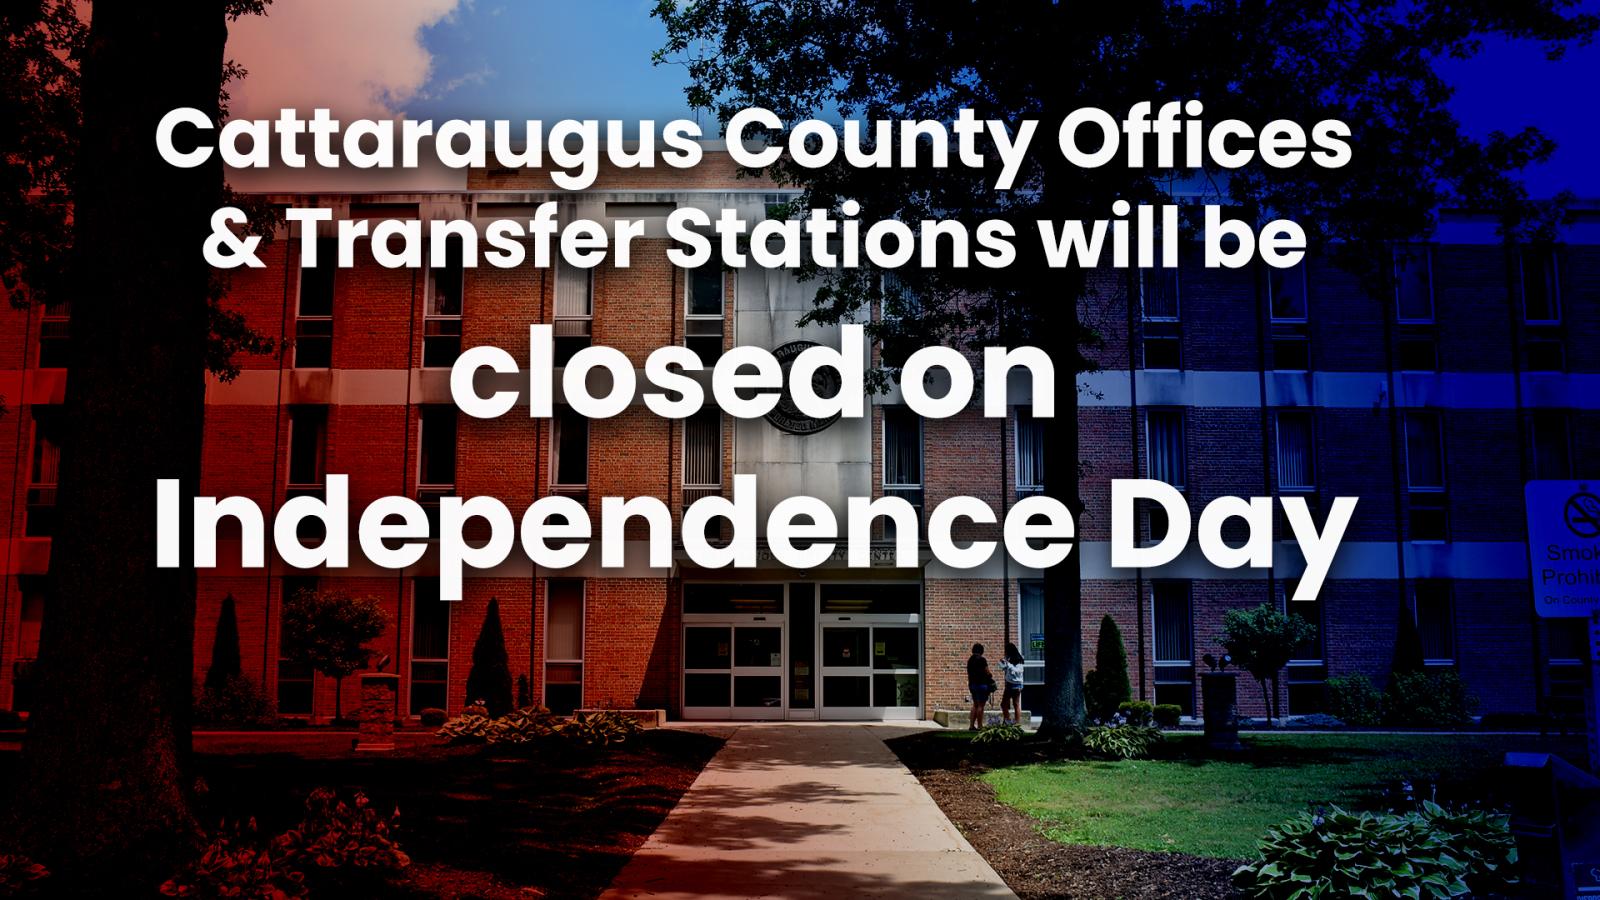 County offices and transfer stations will be closed in observance of Independence Day